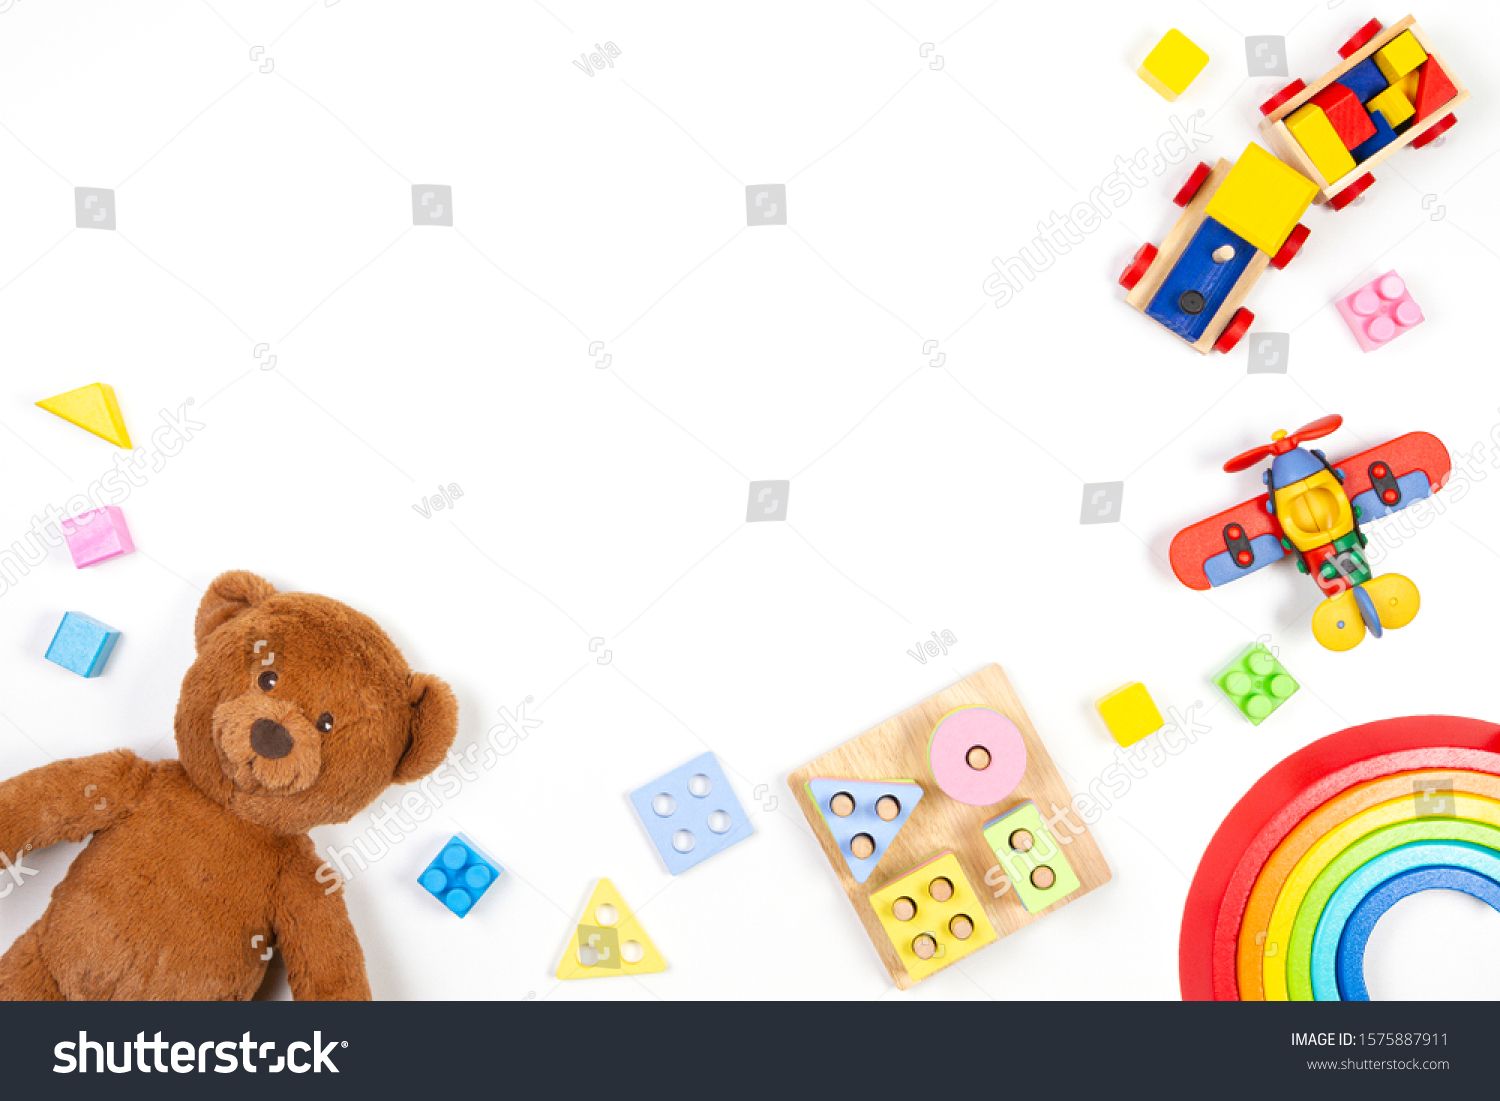 Baby kids toys background teddy bear wooden educational stackg color recognition puzzle toy wooden tra teddy bear and colorfâ kids toys teddy bear teddy